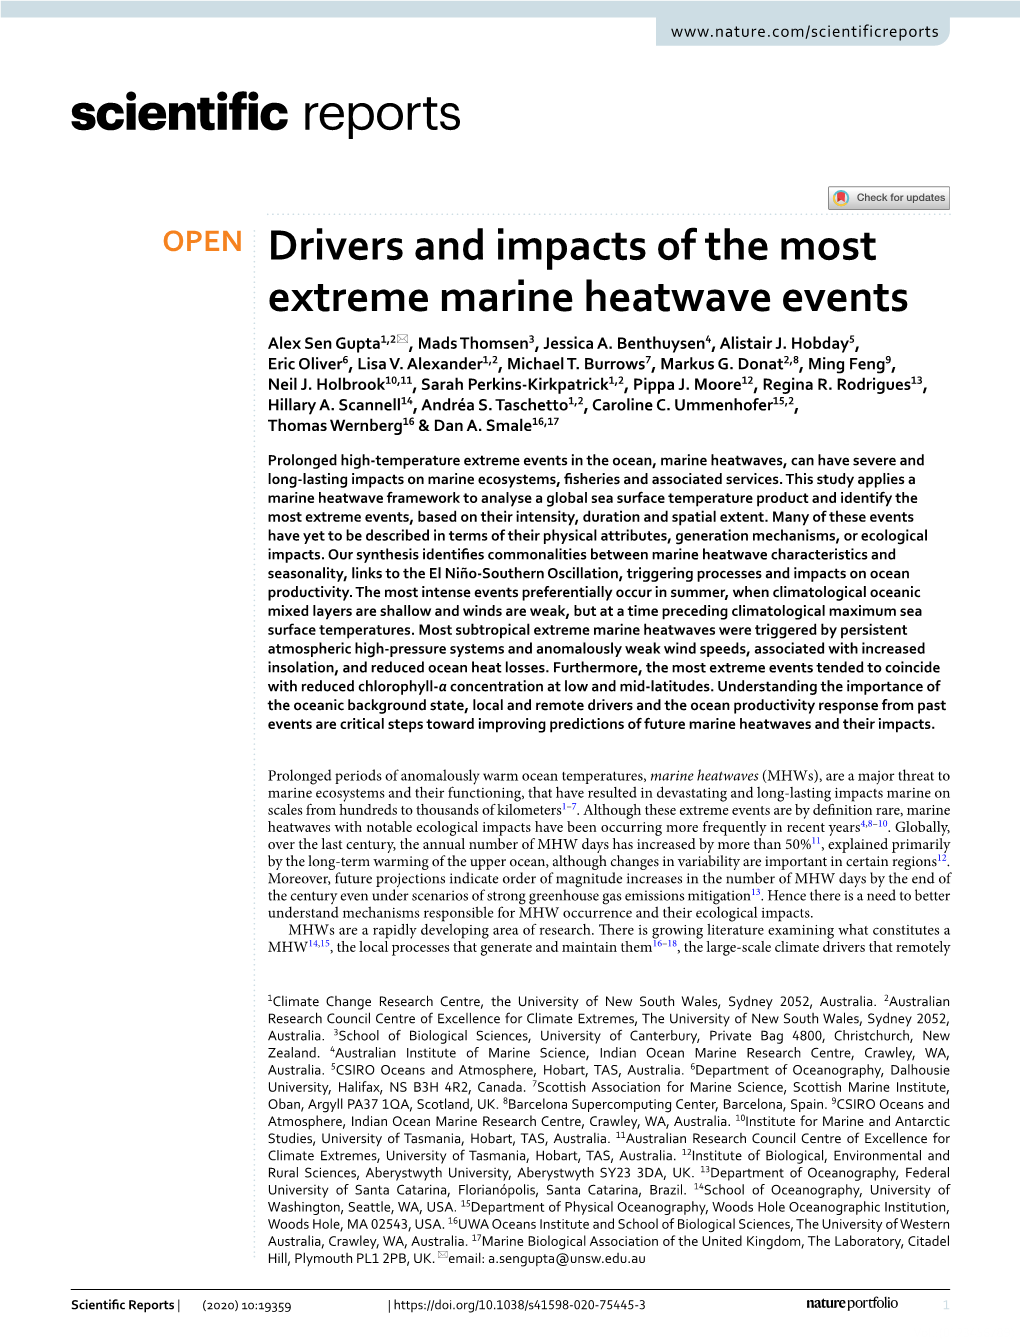 Drivers and Impacts of the Most Extreme Marine Heatwave Events Alex Sen Gupta1,2*, Mads Thomsen3, Jessica A